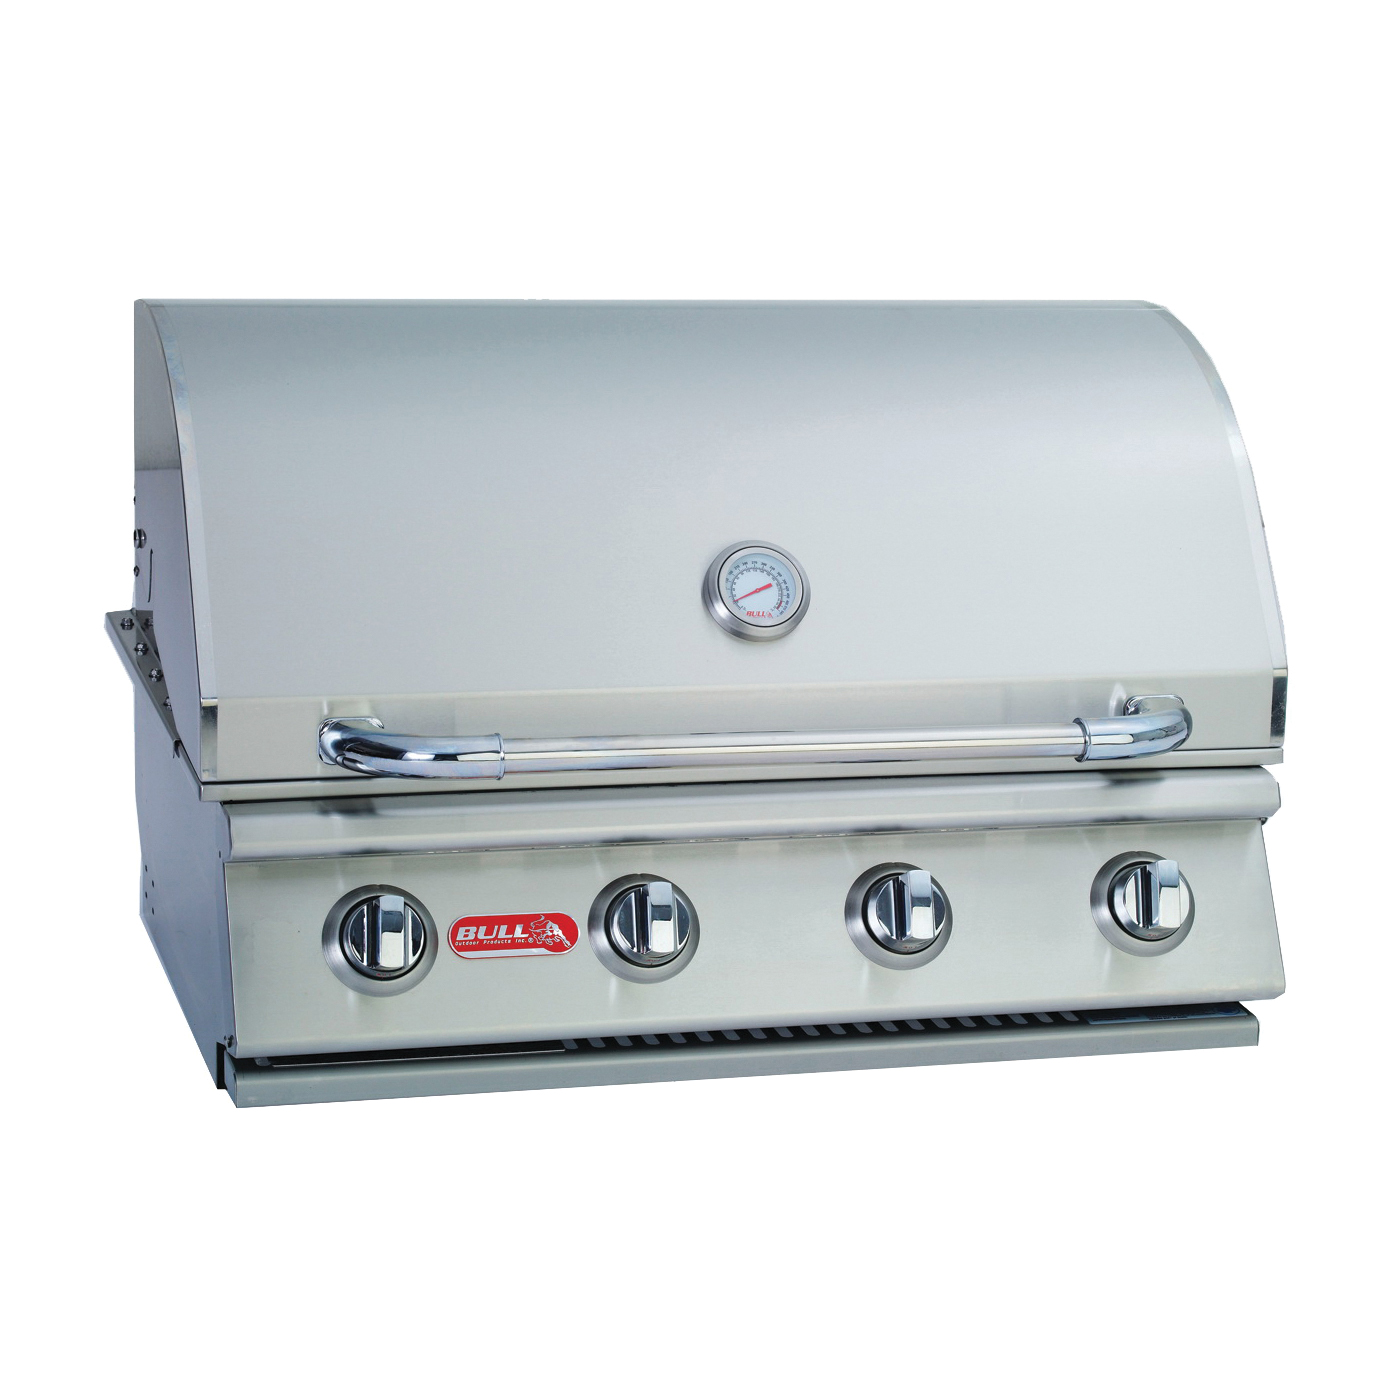 OUTLAW 26038 Gas Grill Head, 60000 Btu BTU, LP, 4 -Burner, 210 sq-in Secondary Cooking Surface